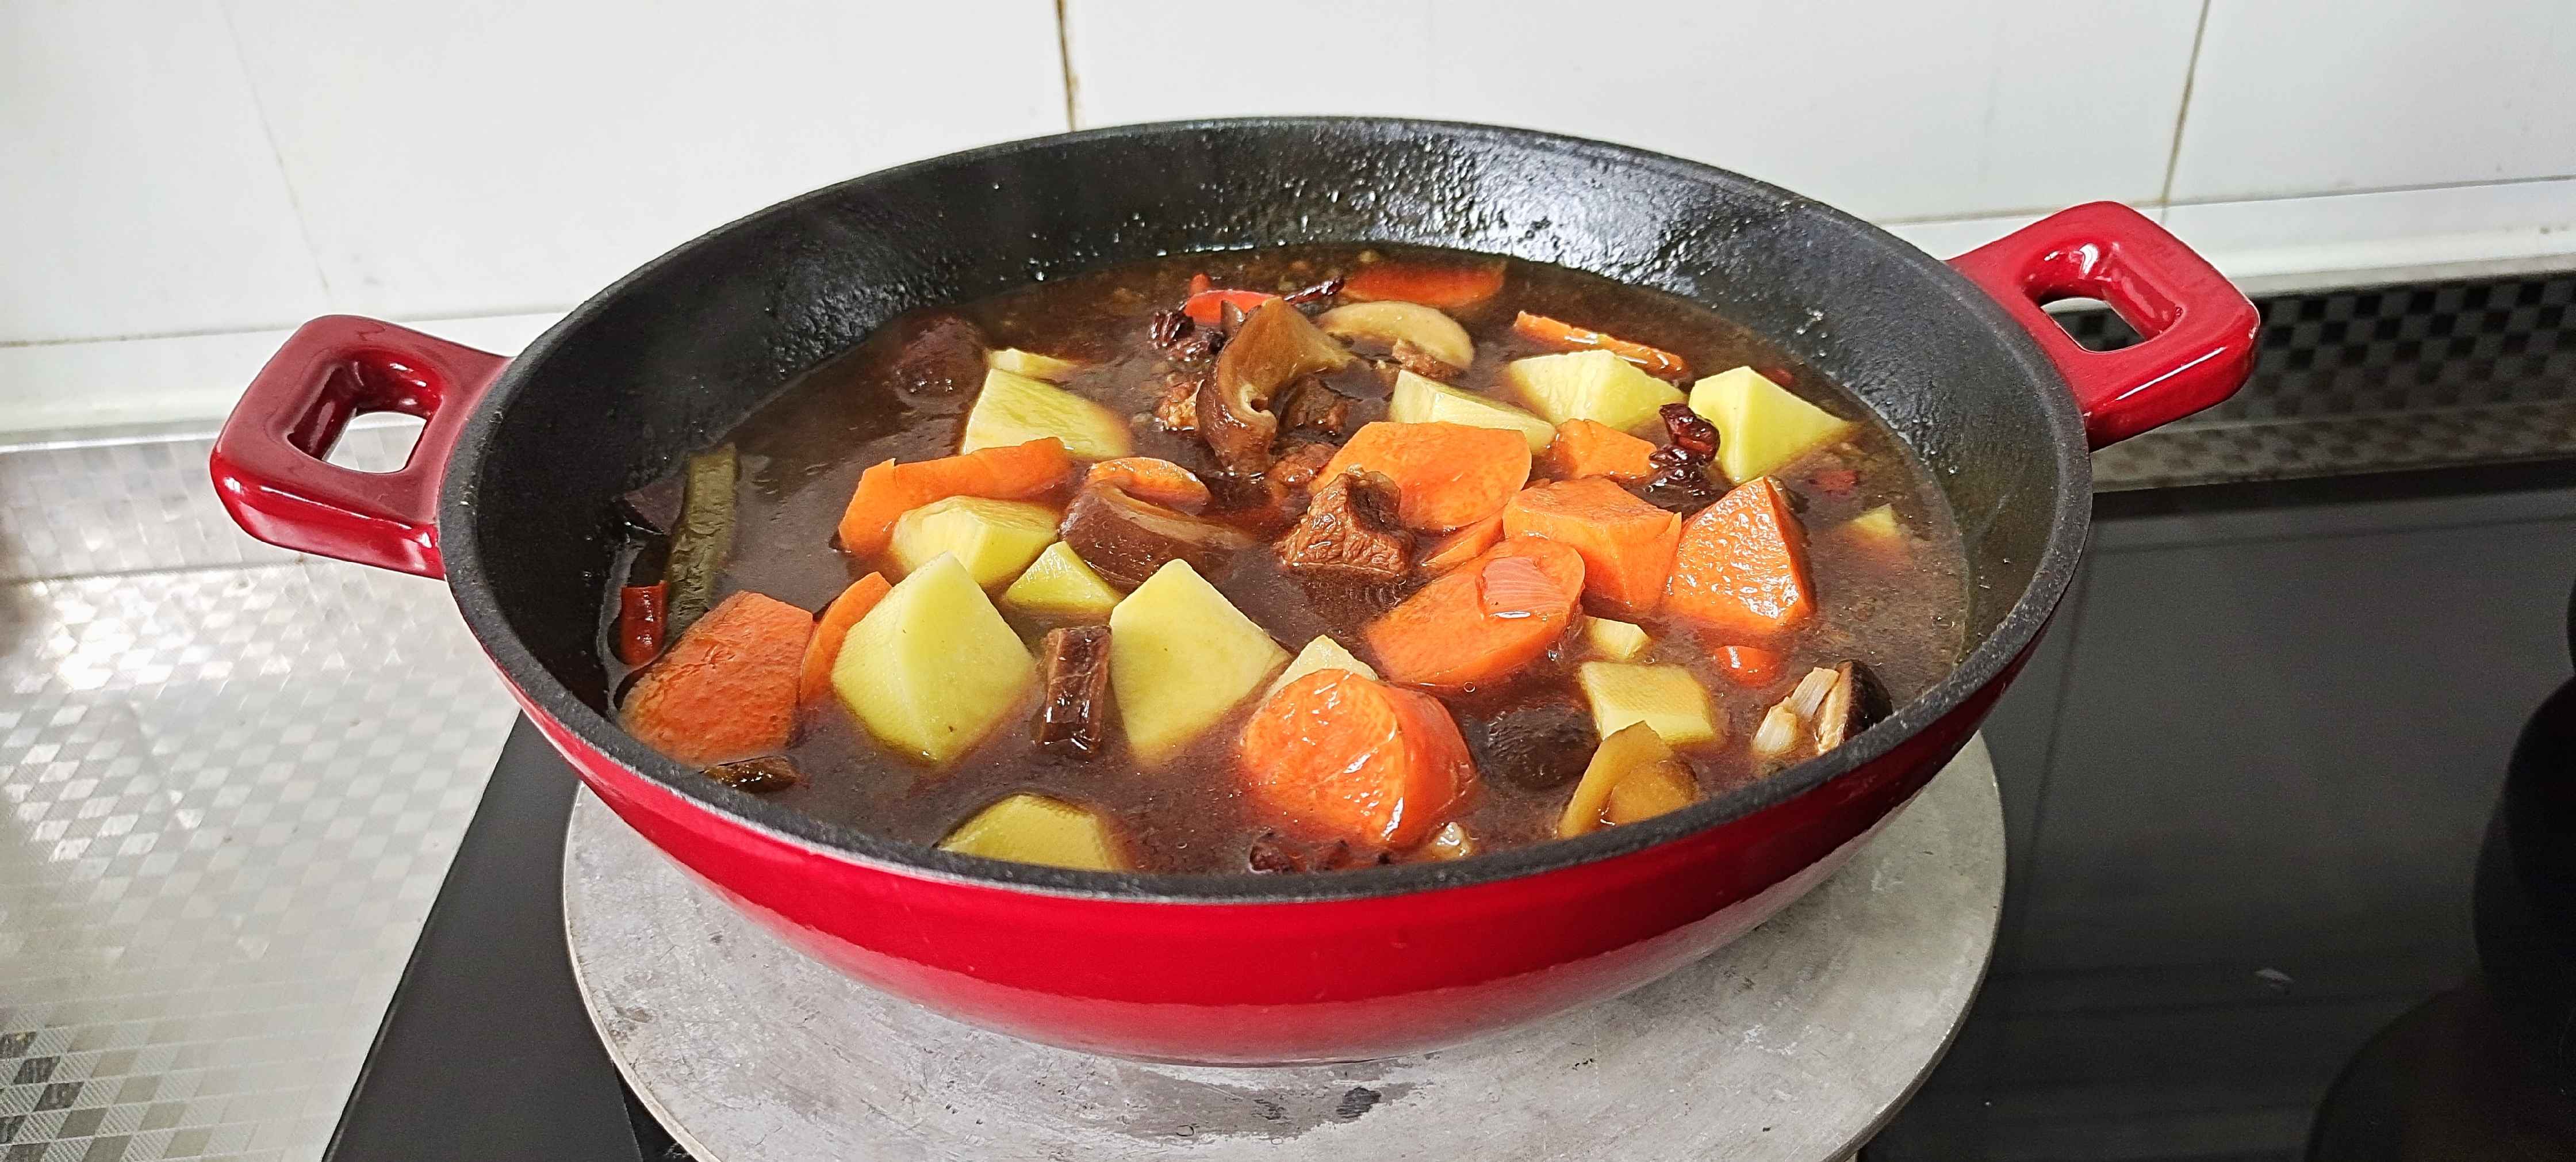 Beef in Winter Does This, It Warms The Body, Warms The Stomach and is Nourishing...red Braised Beef recipe